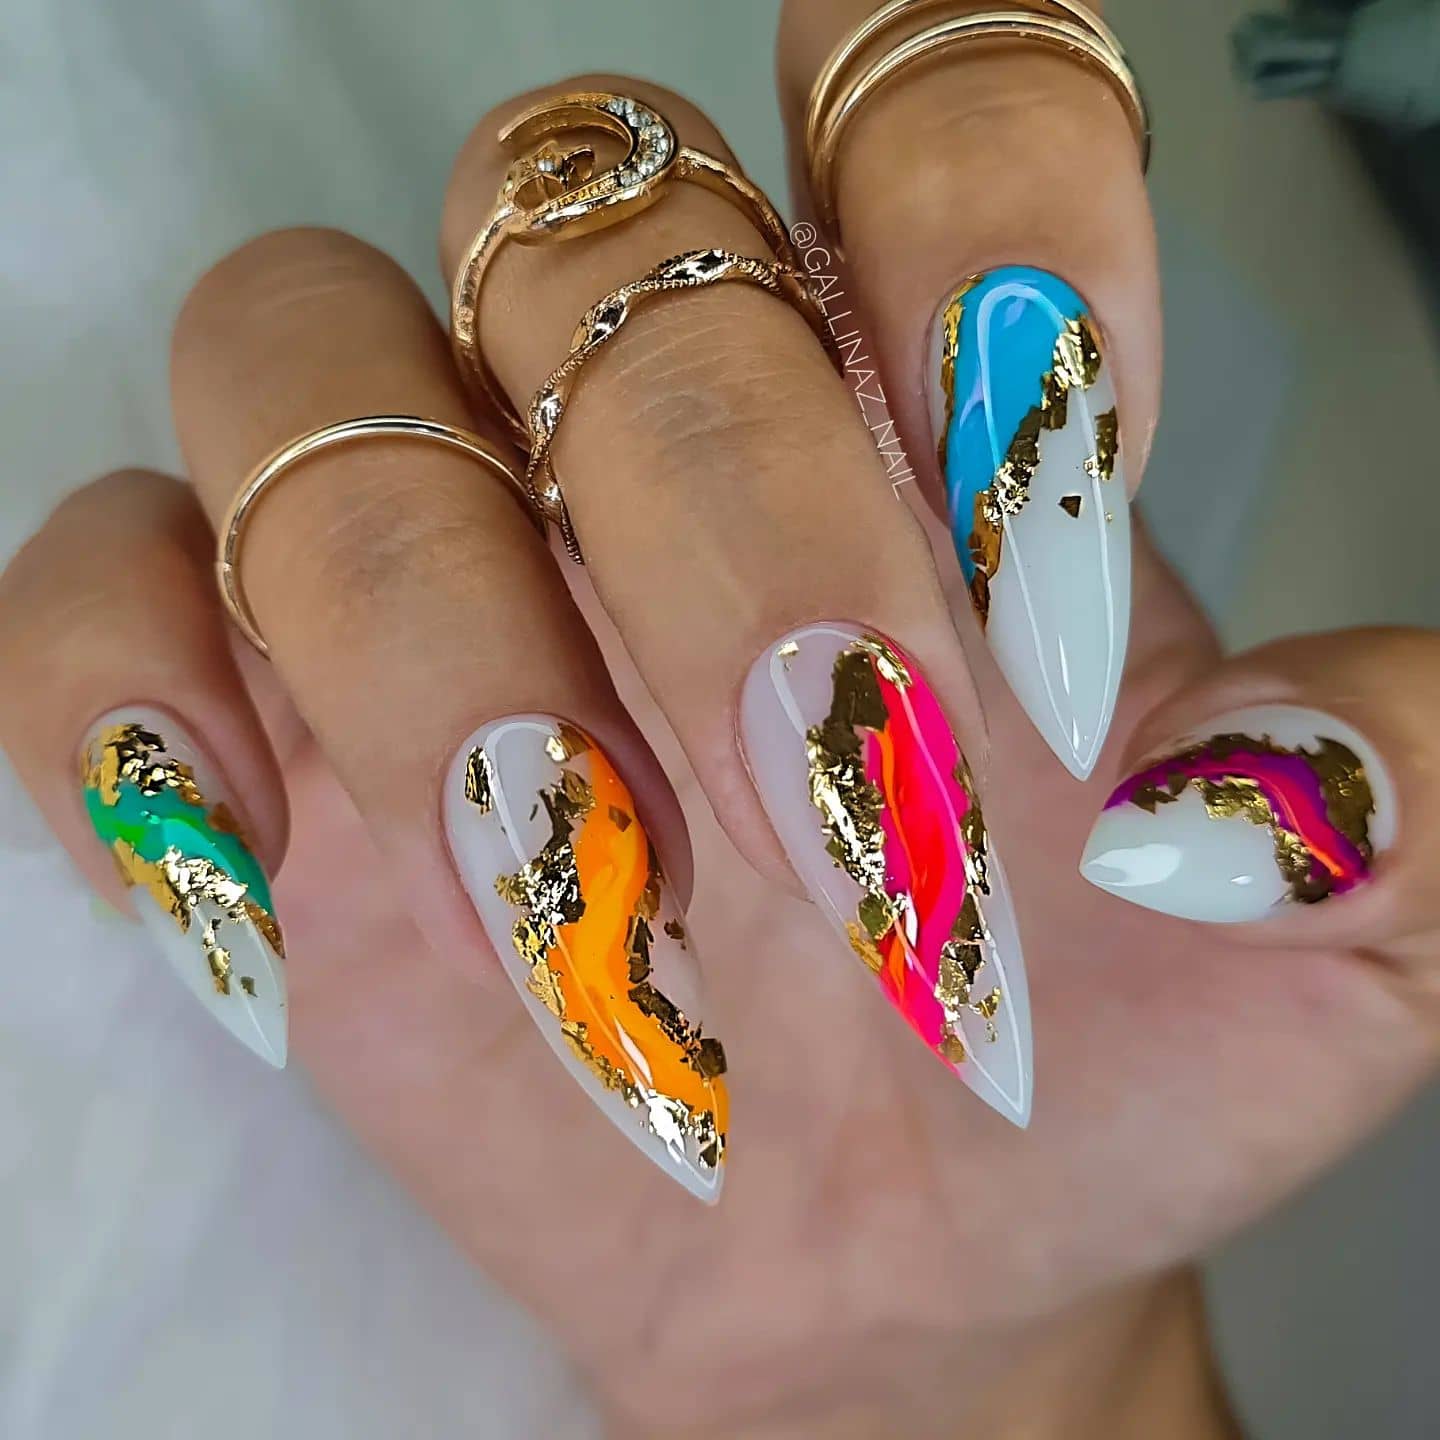 Over 100 Bright Summer Nail Art Designs That Will Be So Trendy images 3